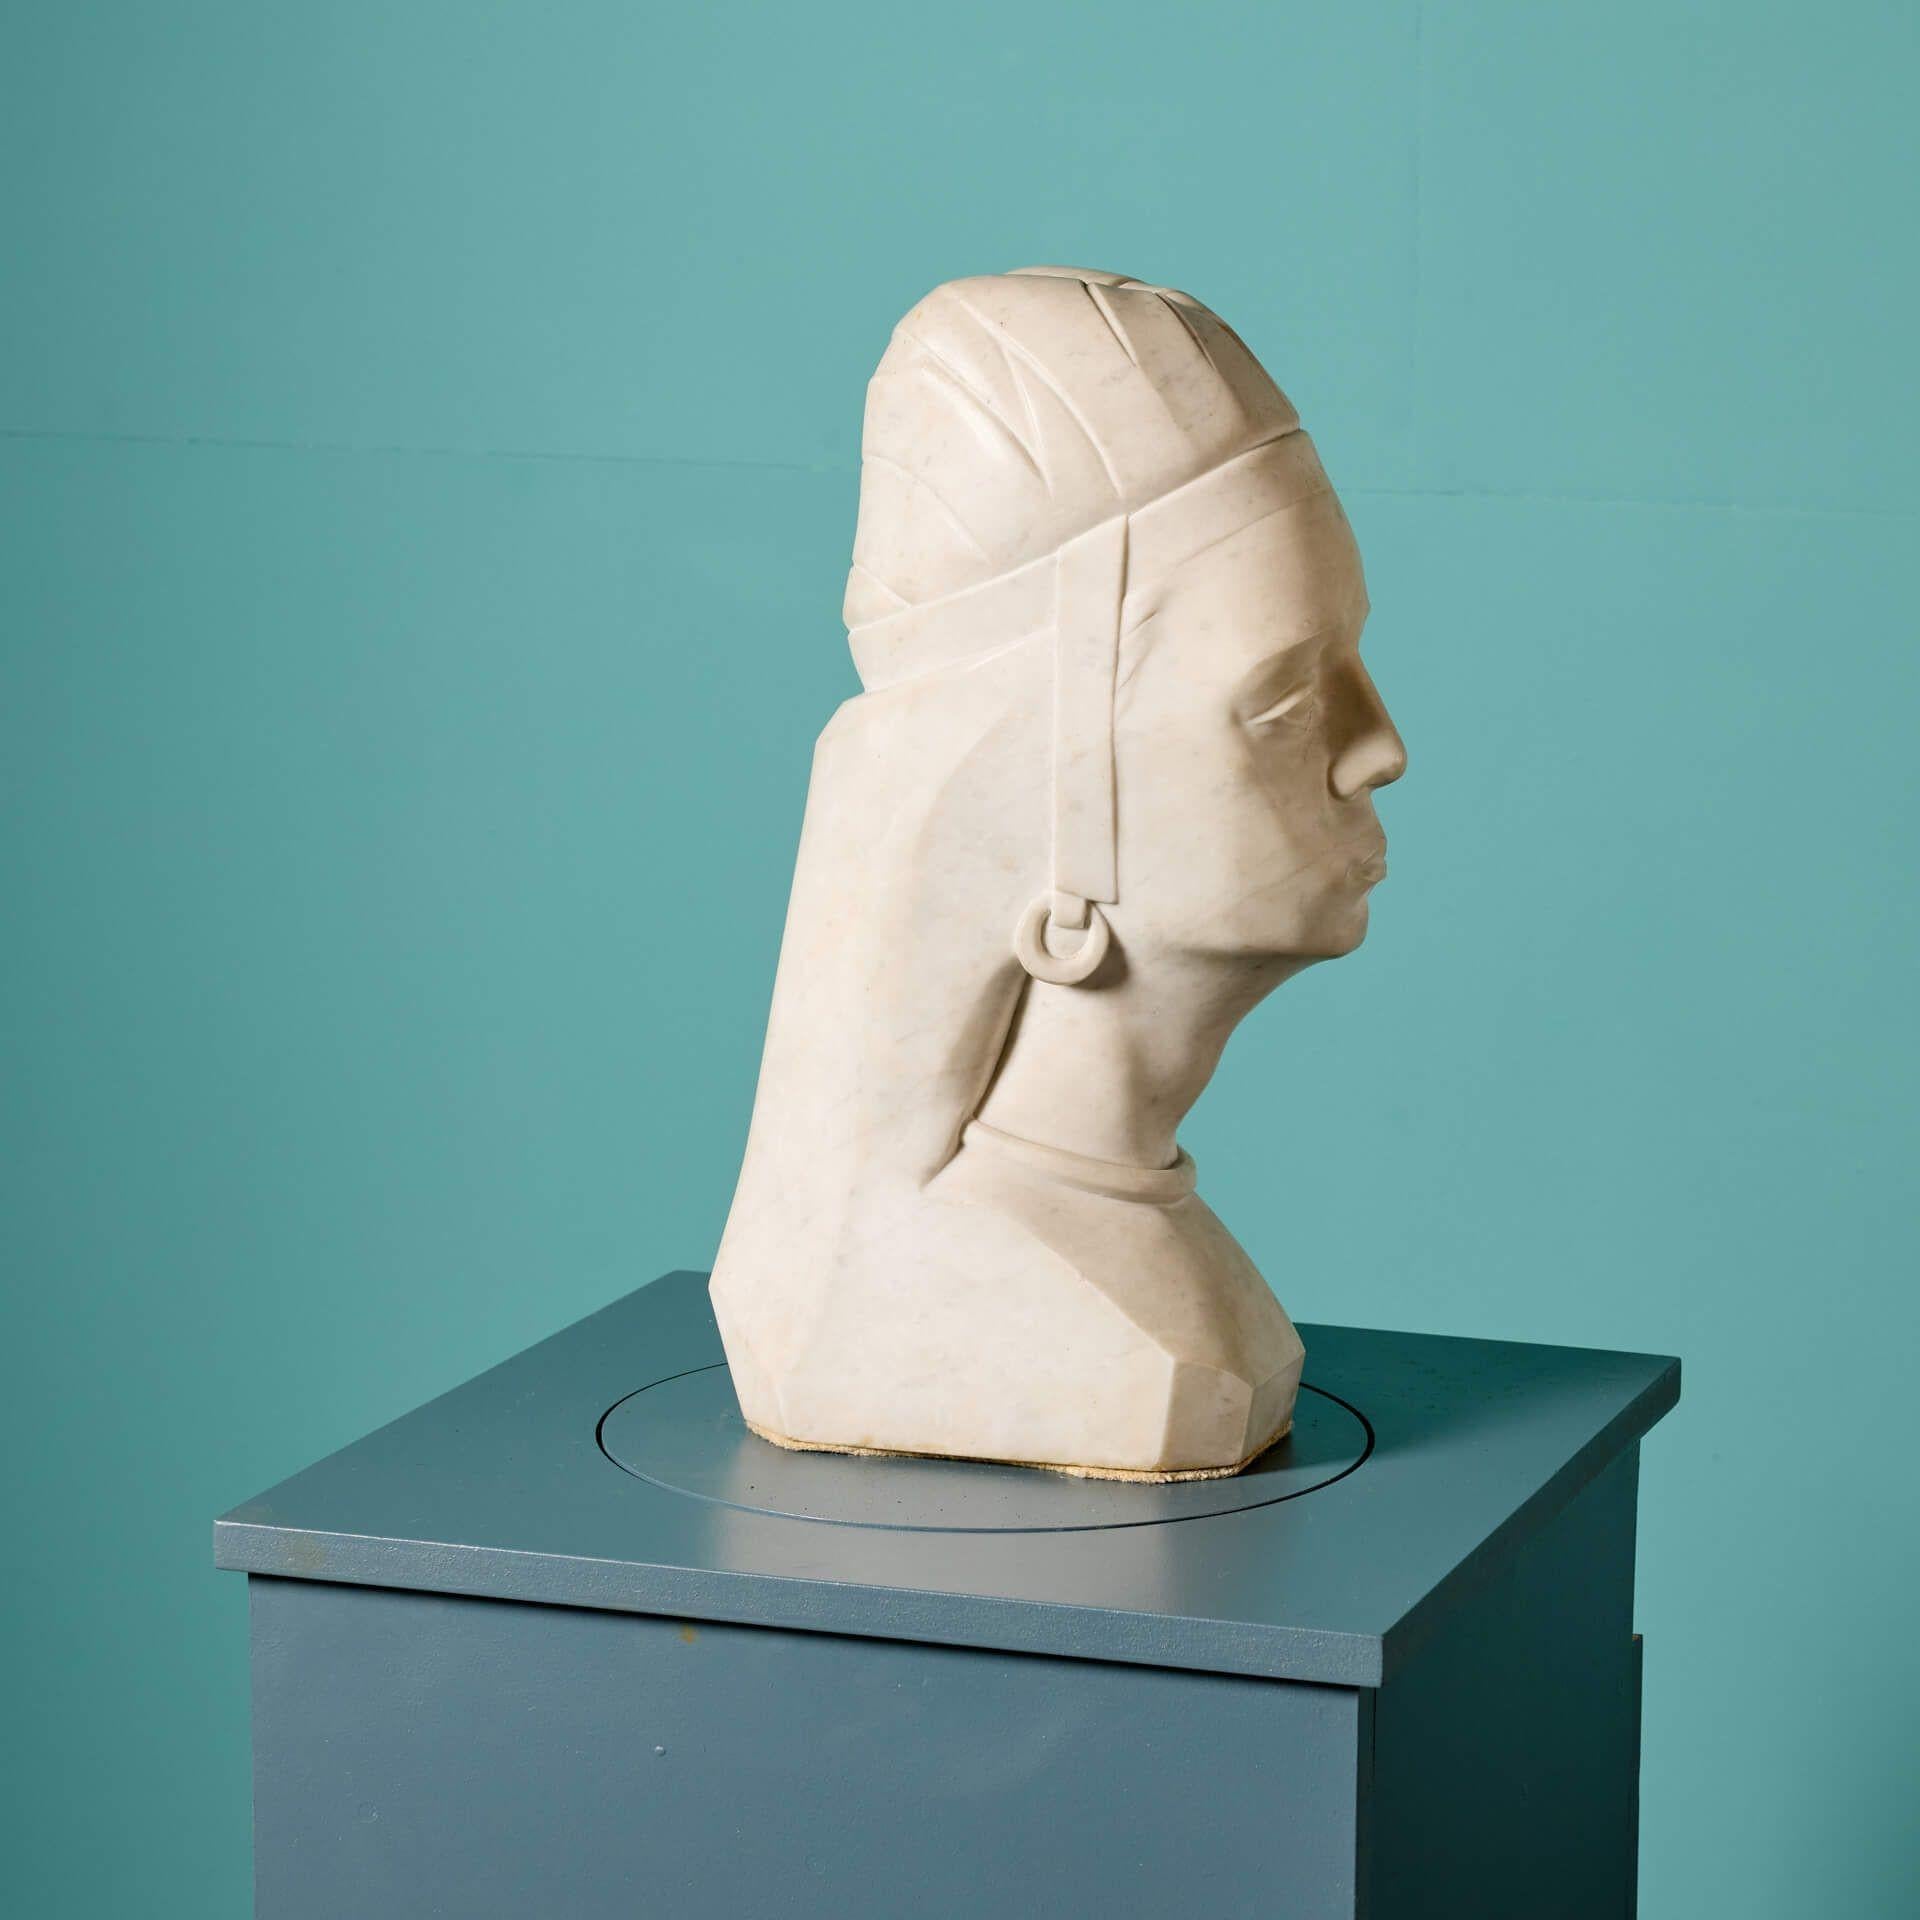 English Antique Art Deco Carrara Marble Bust of Noble Woman For Sale